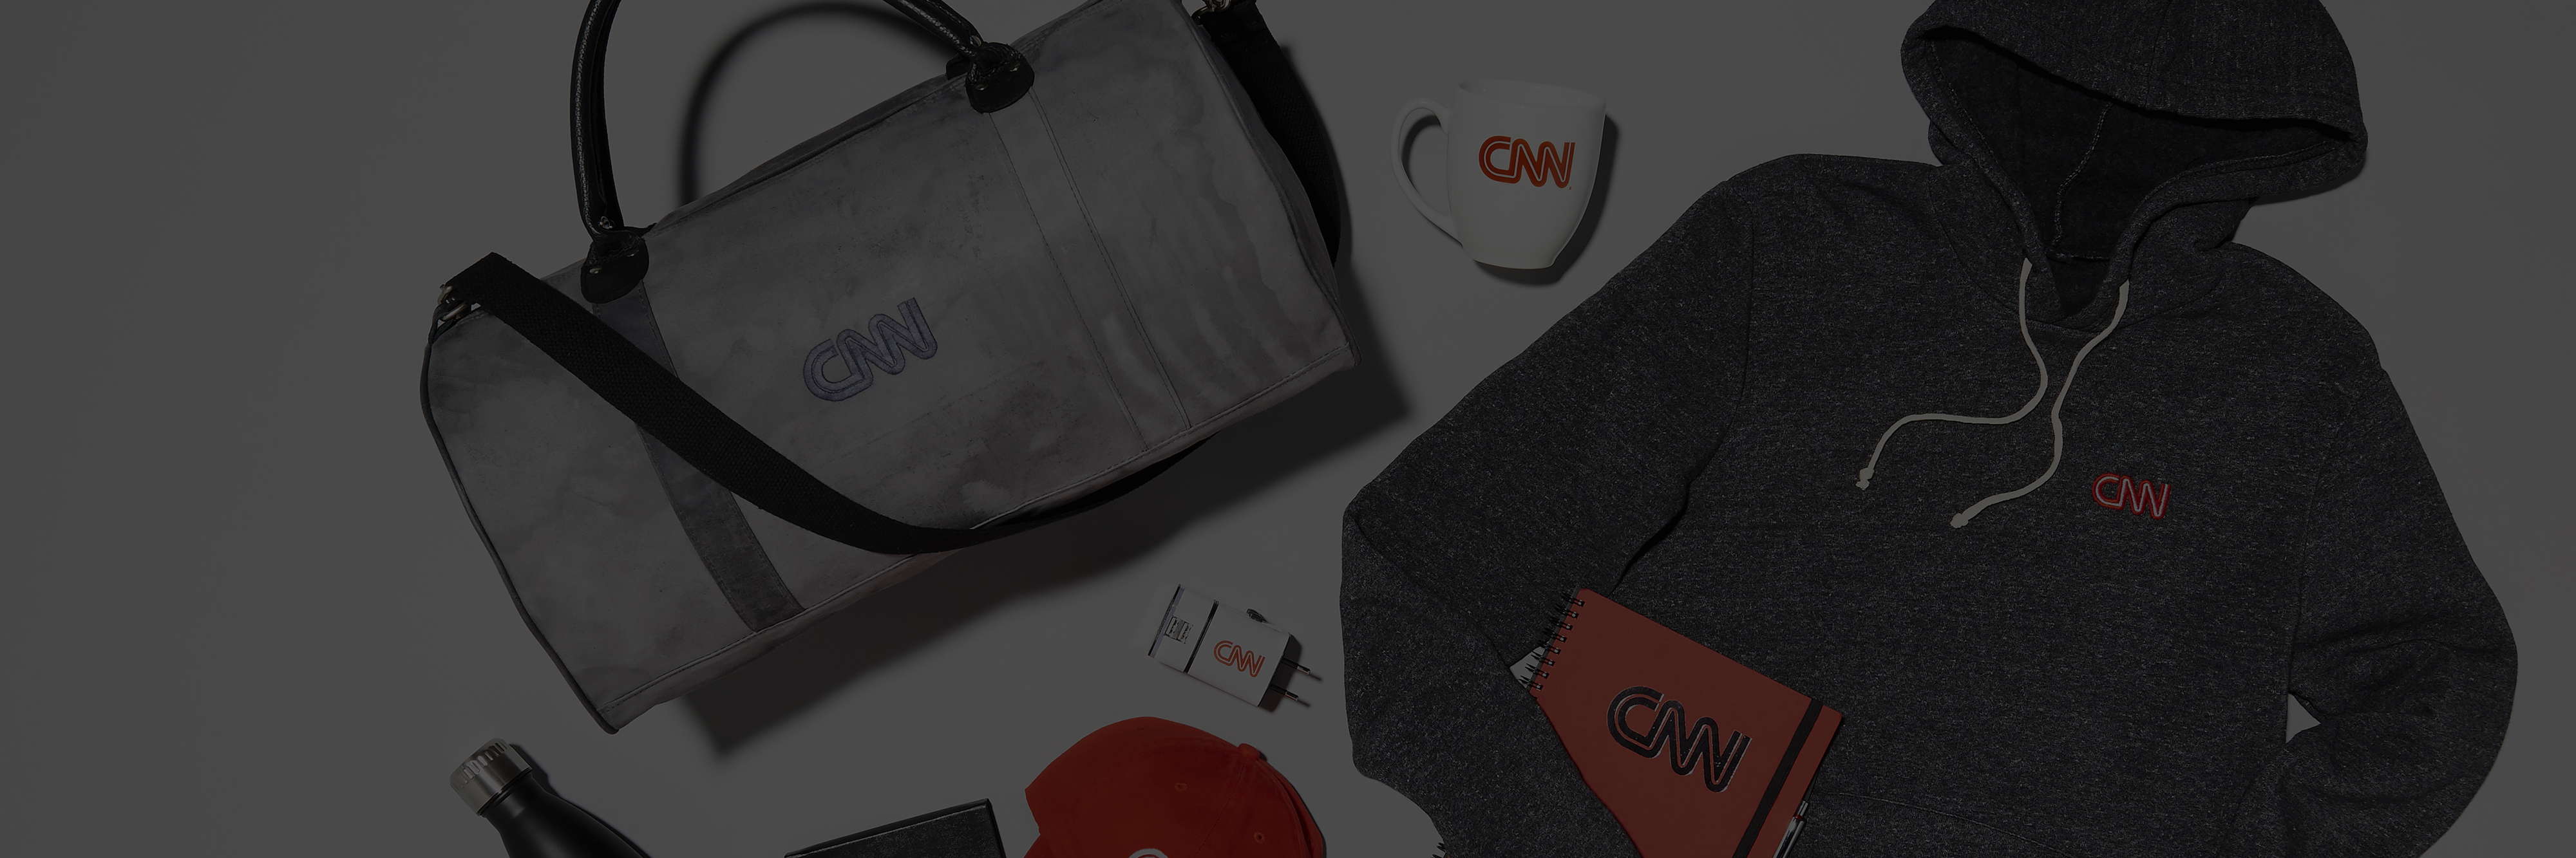 Welcome To The CNN Store